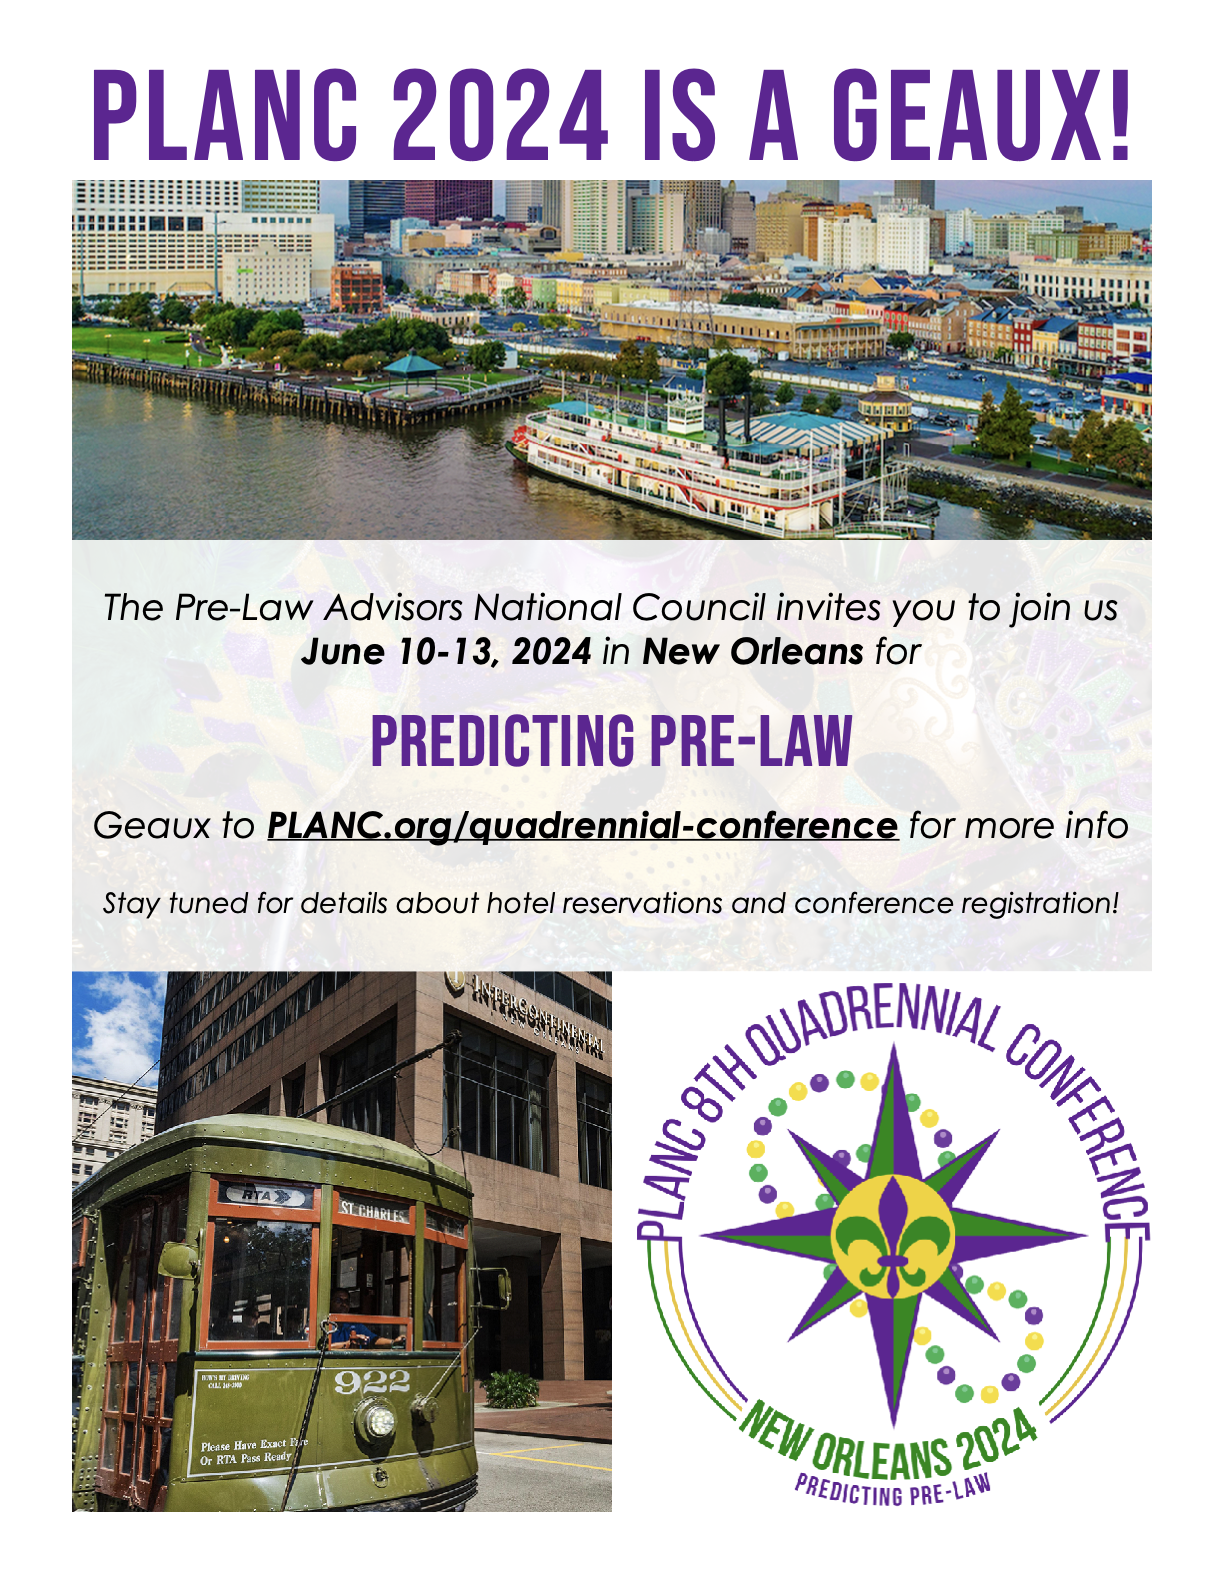 PLANC 2024 is a GEAUX! The Pre-Law Advisors National Council invites you o join us June 10-13, 2024 in New Orleans for "Predicting Pre-Law". Geaux to PLANC.org/quadriennial conference for more info. Stay tuned for details about hotel reservations and conference registration!